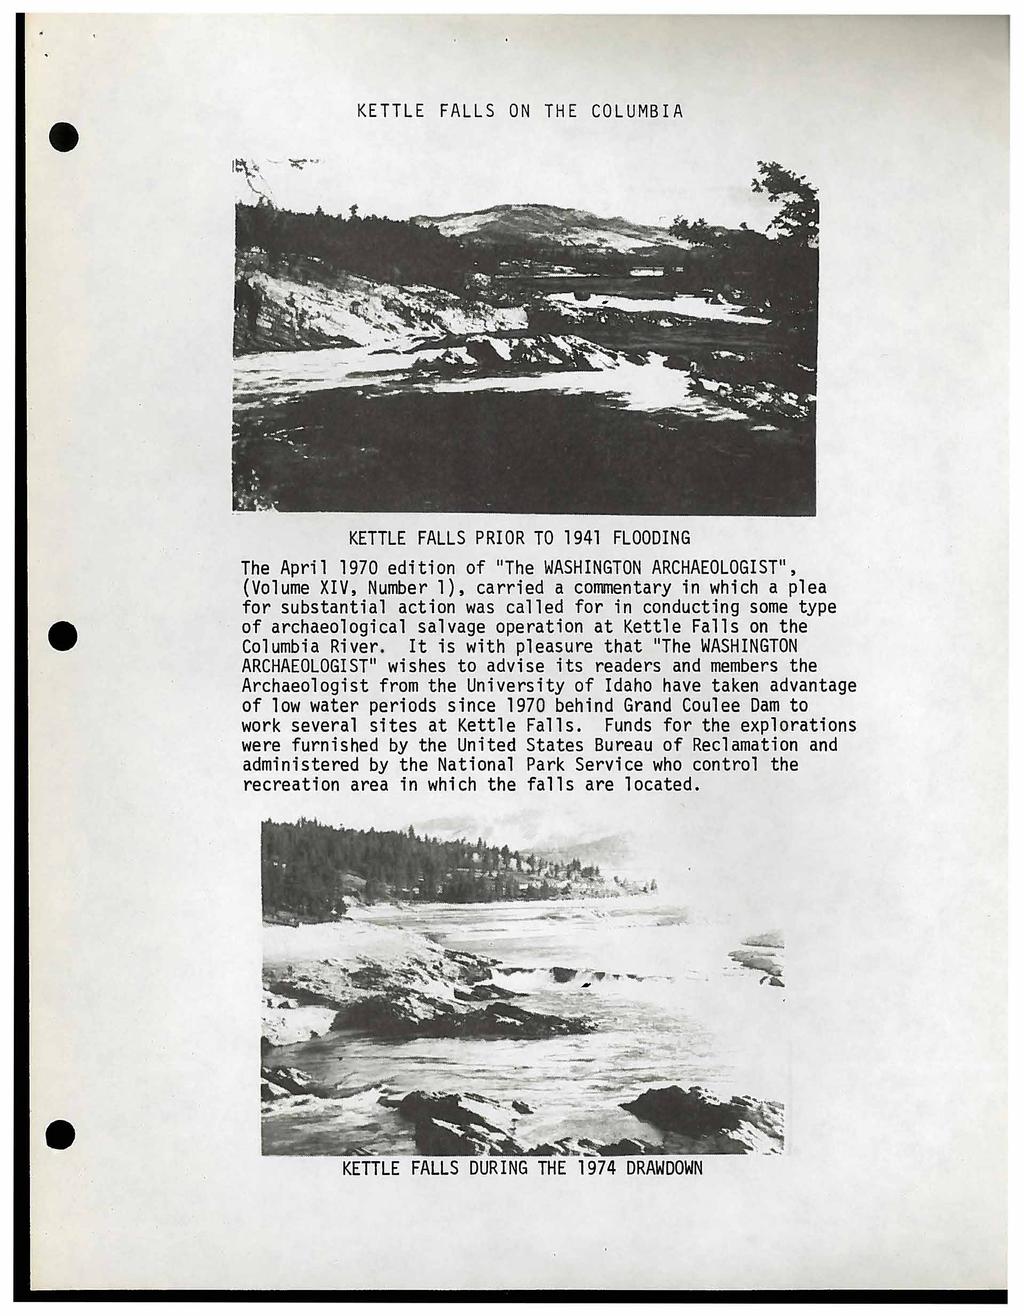 KETTLE FALLS ON THE COLUMBIA KETTLE FALLS PRIOR TO 1941 FLOODING The April 1970 edition of 11 The WASHINGTON ARCHAEOLOGIST 11, (Volume XIV, Number 1), carried a commentary in which a plea for